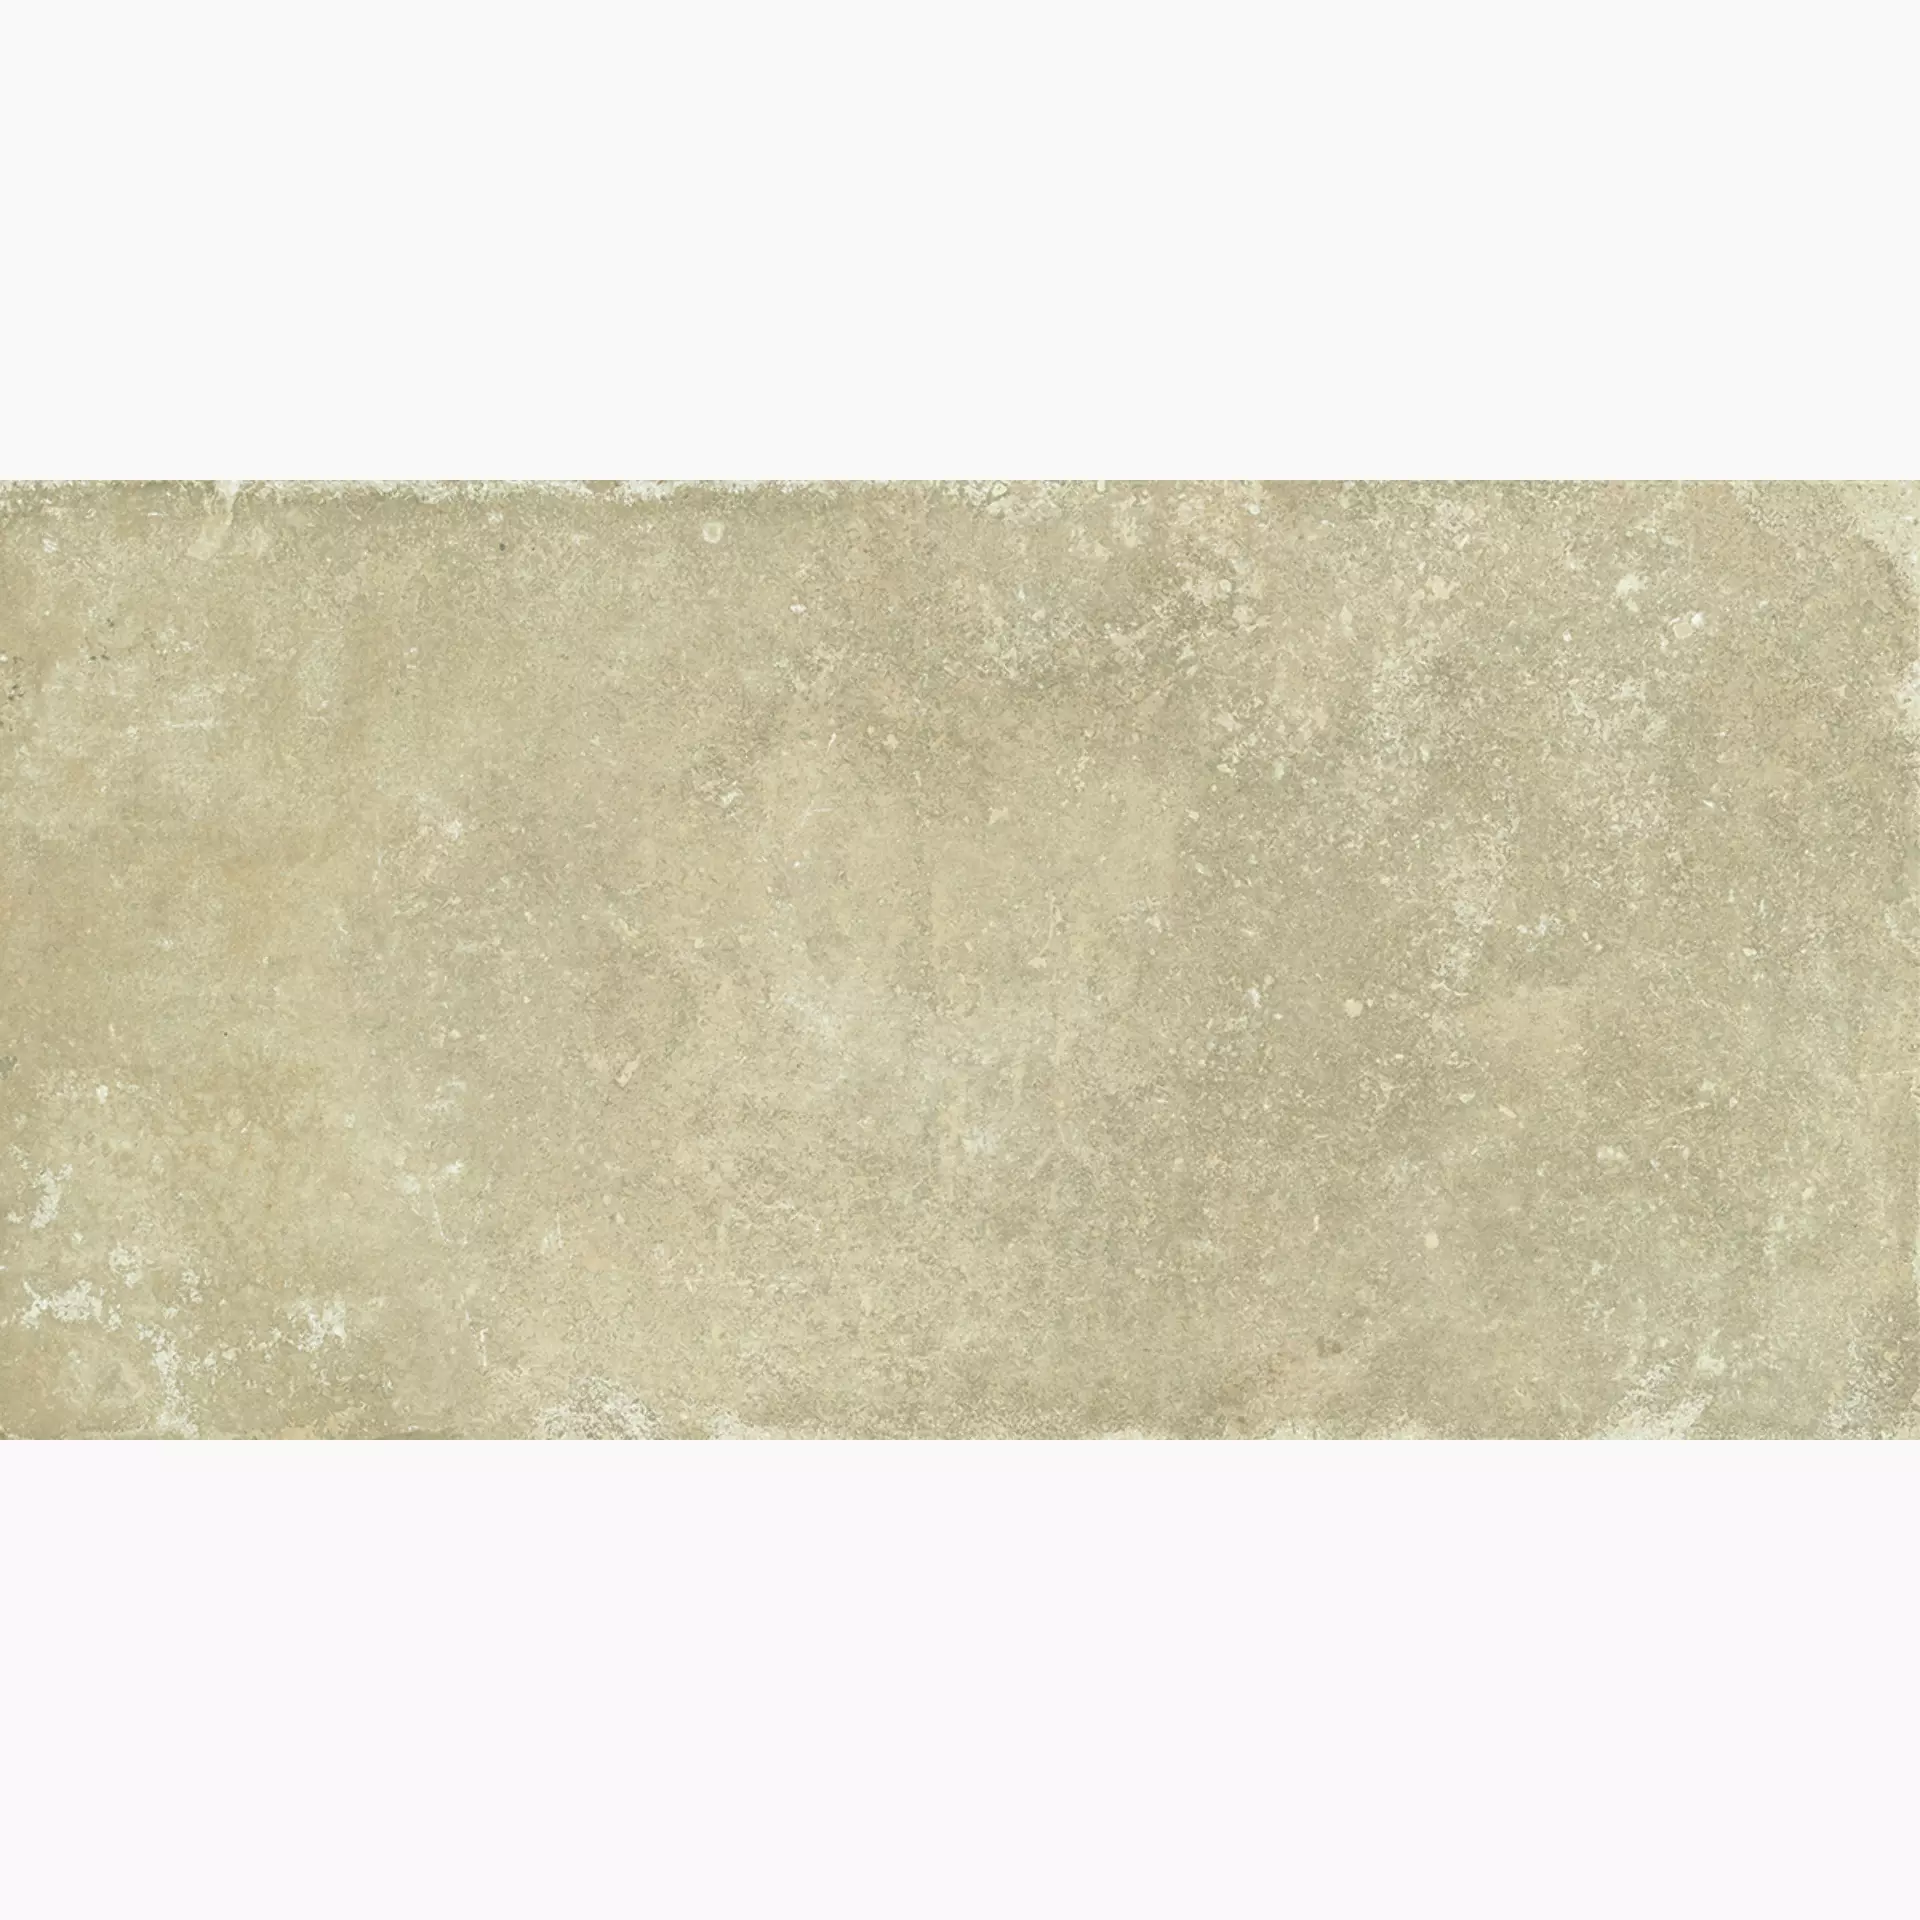 Alfalux Cottage Taupe Naturale 8290037 30x60cm rectified 9mm